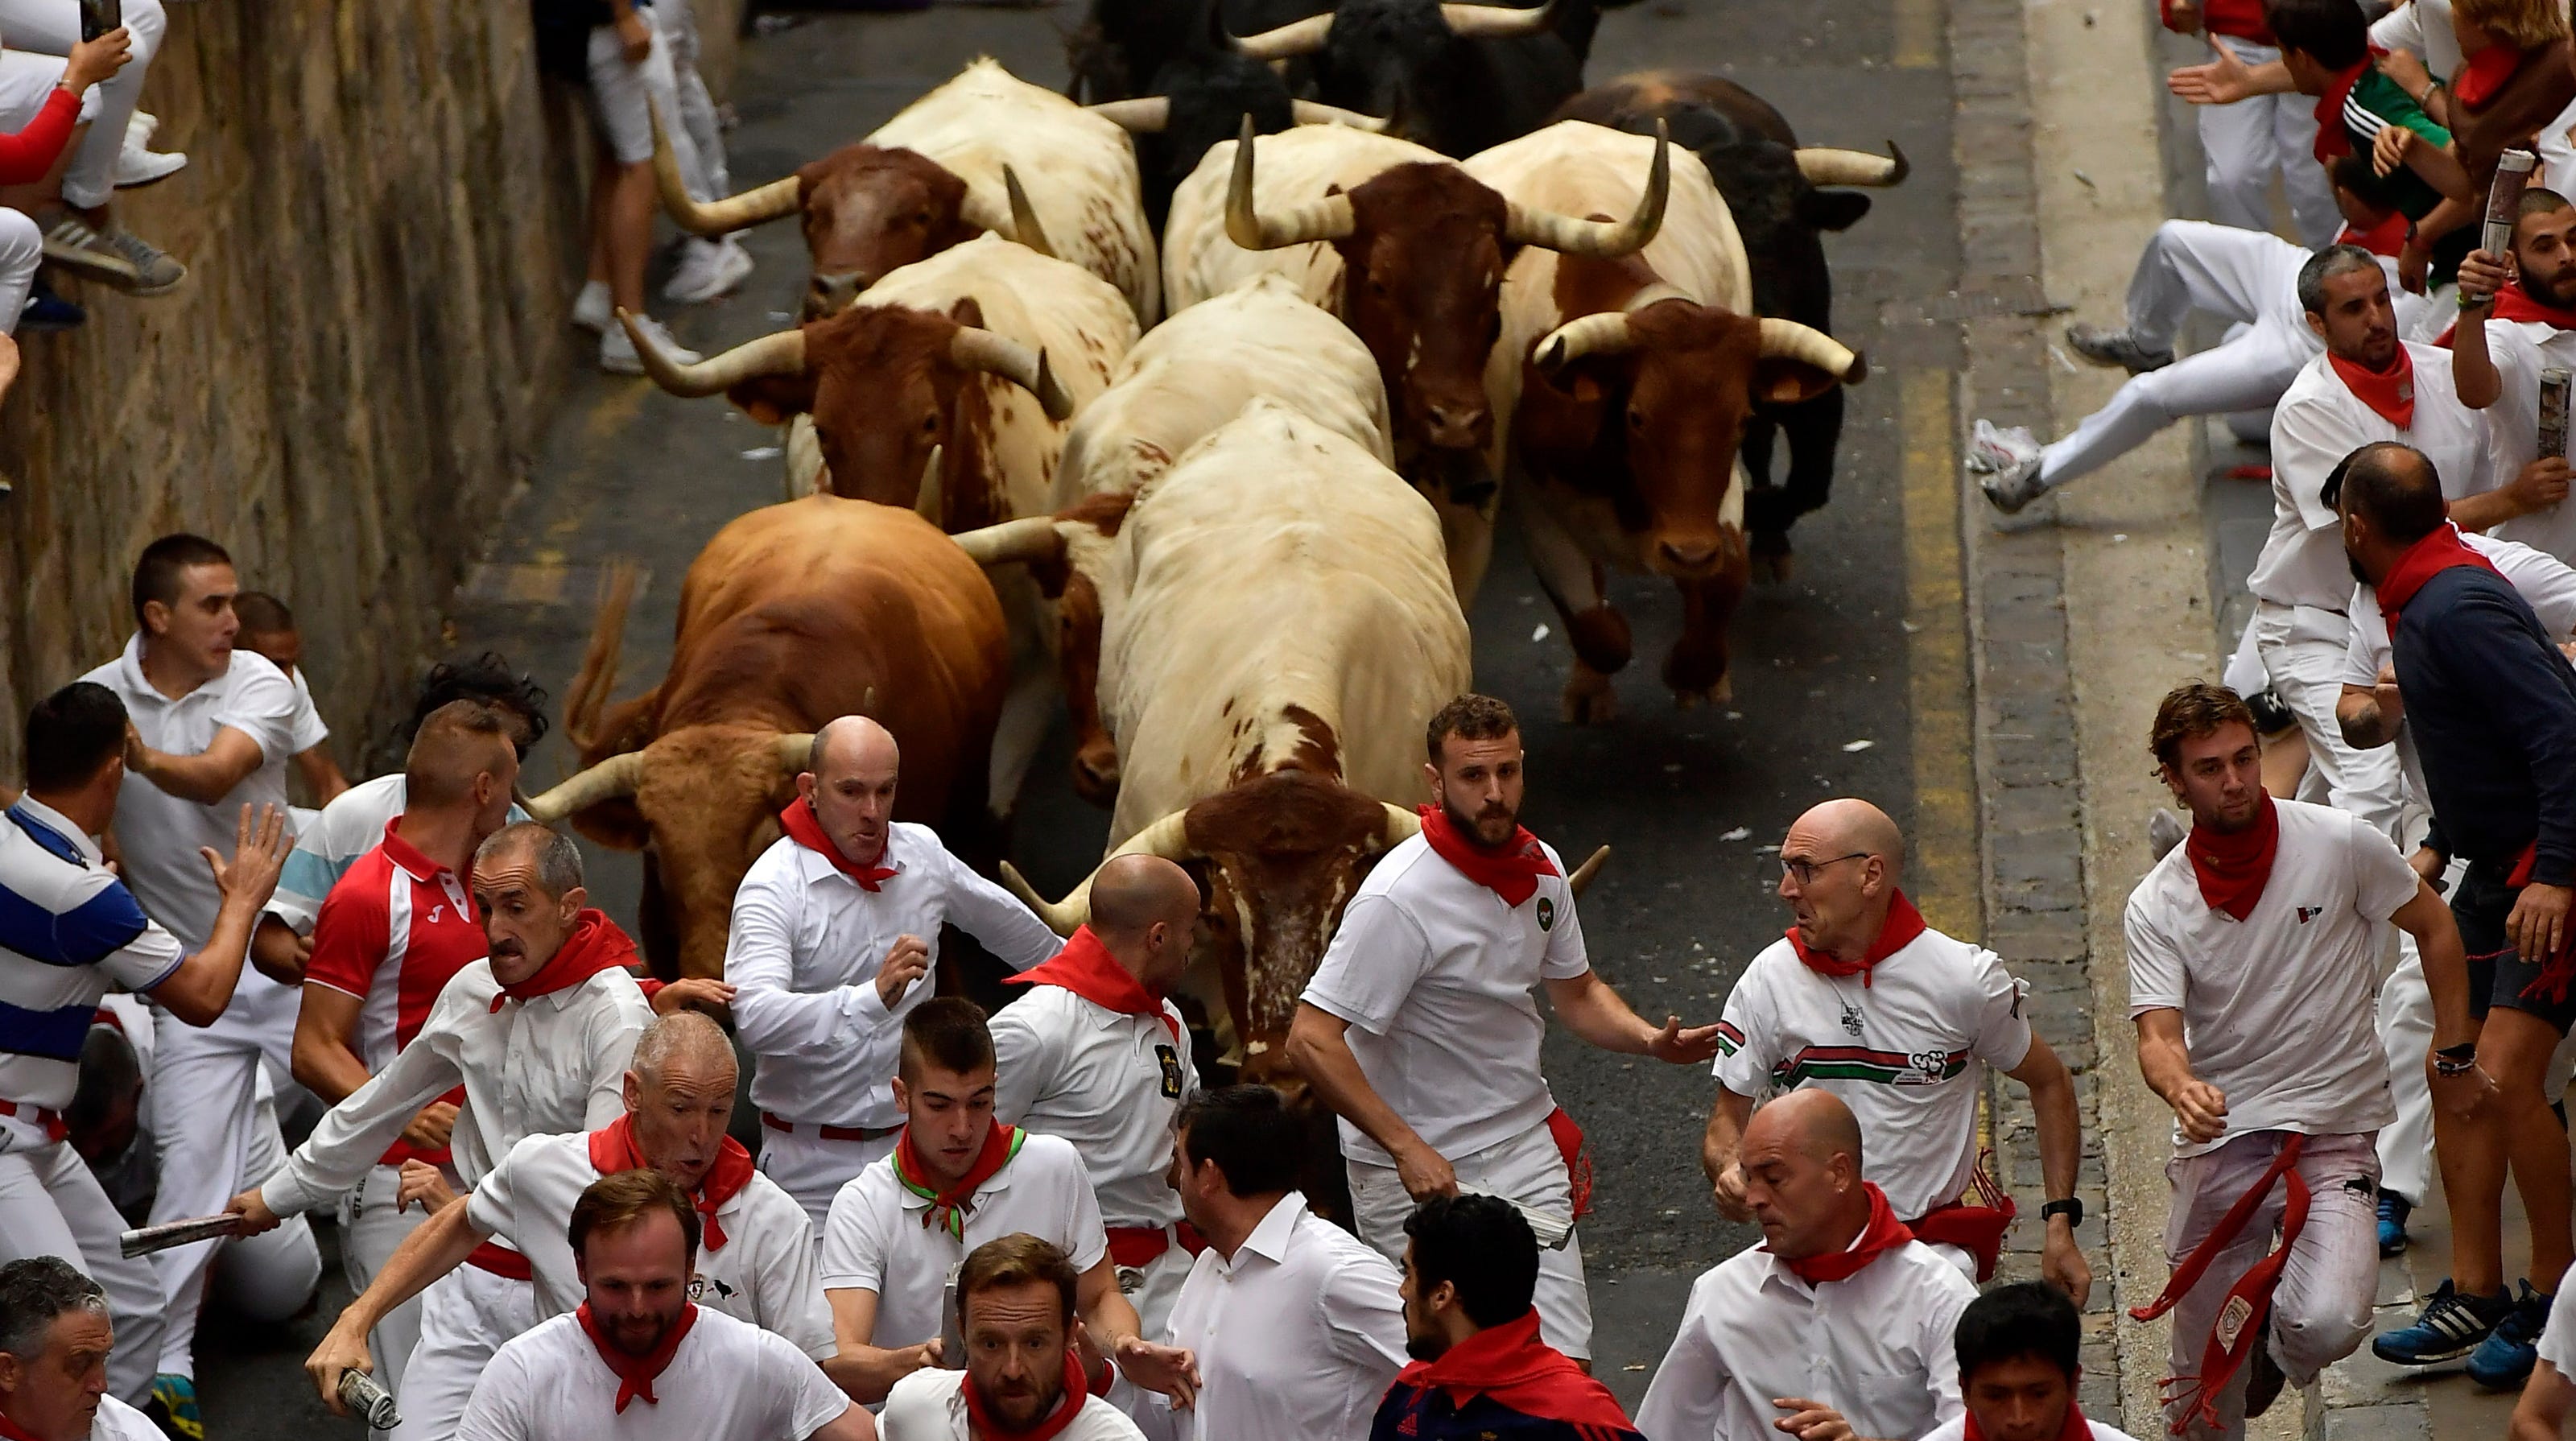 Pamplona running of the bulls 3 gored at opening of 2019 San Fermin